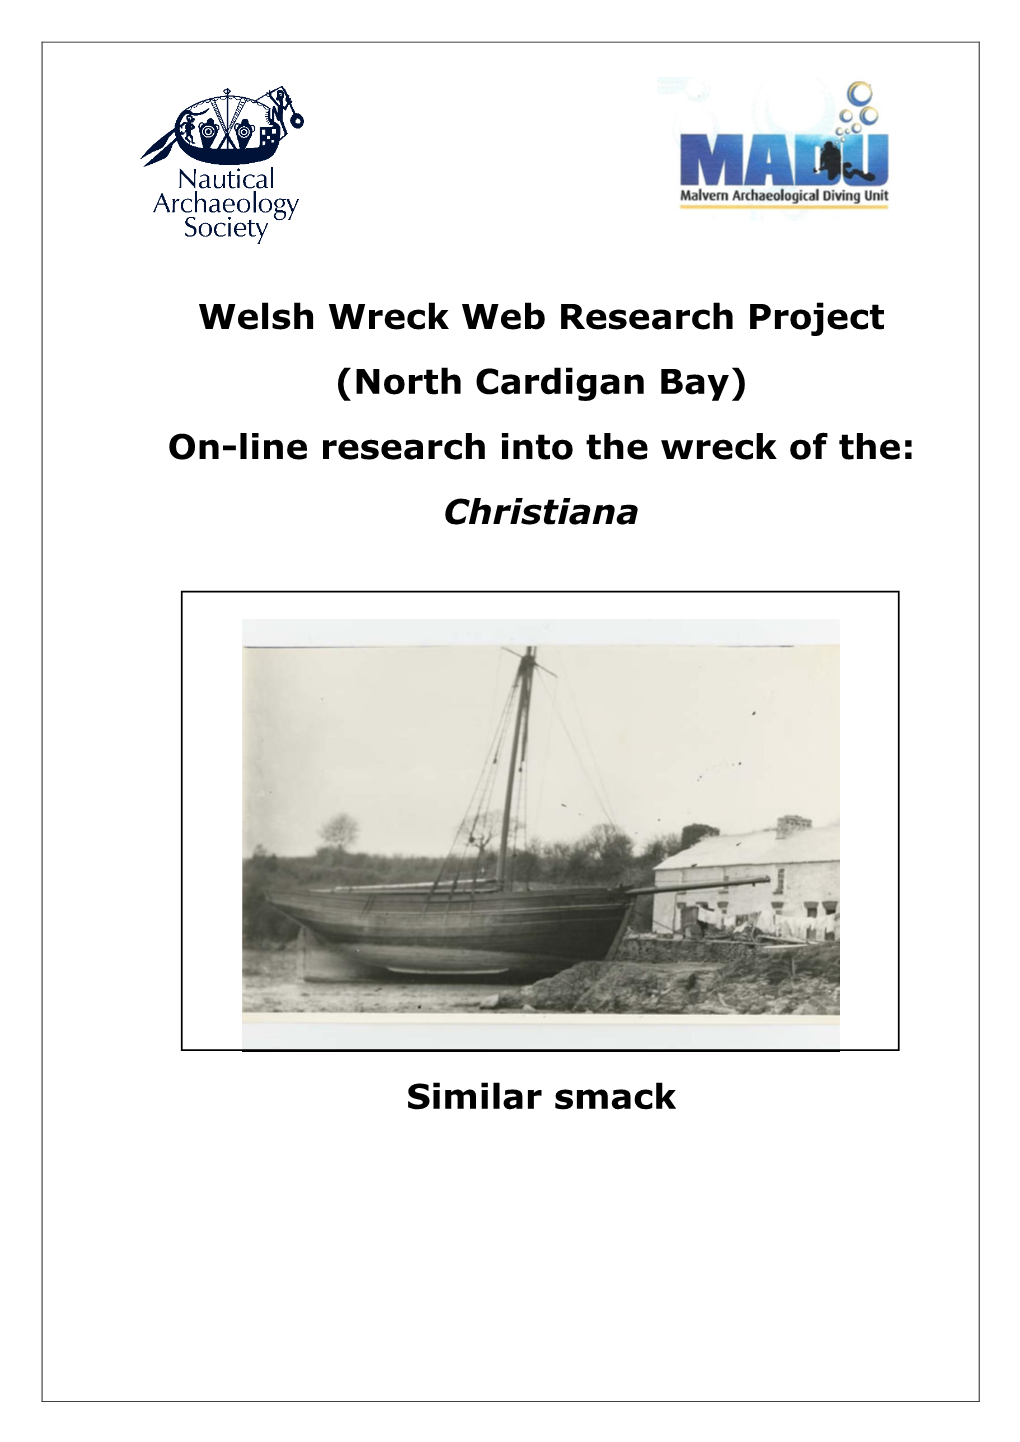 Welsh Wreck Web Research Project (North Cardigan Bay) On-Line Research Into the Wreck of The: Christiana